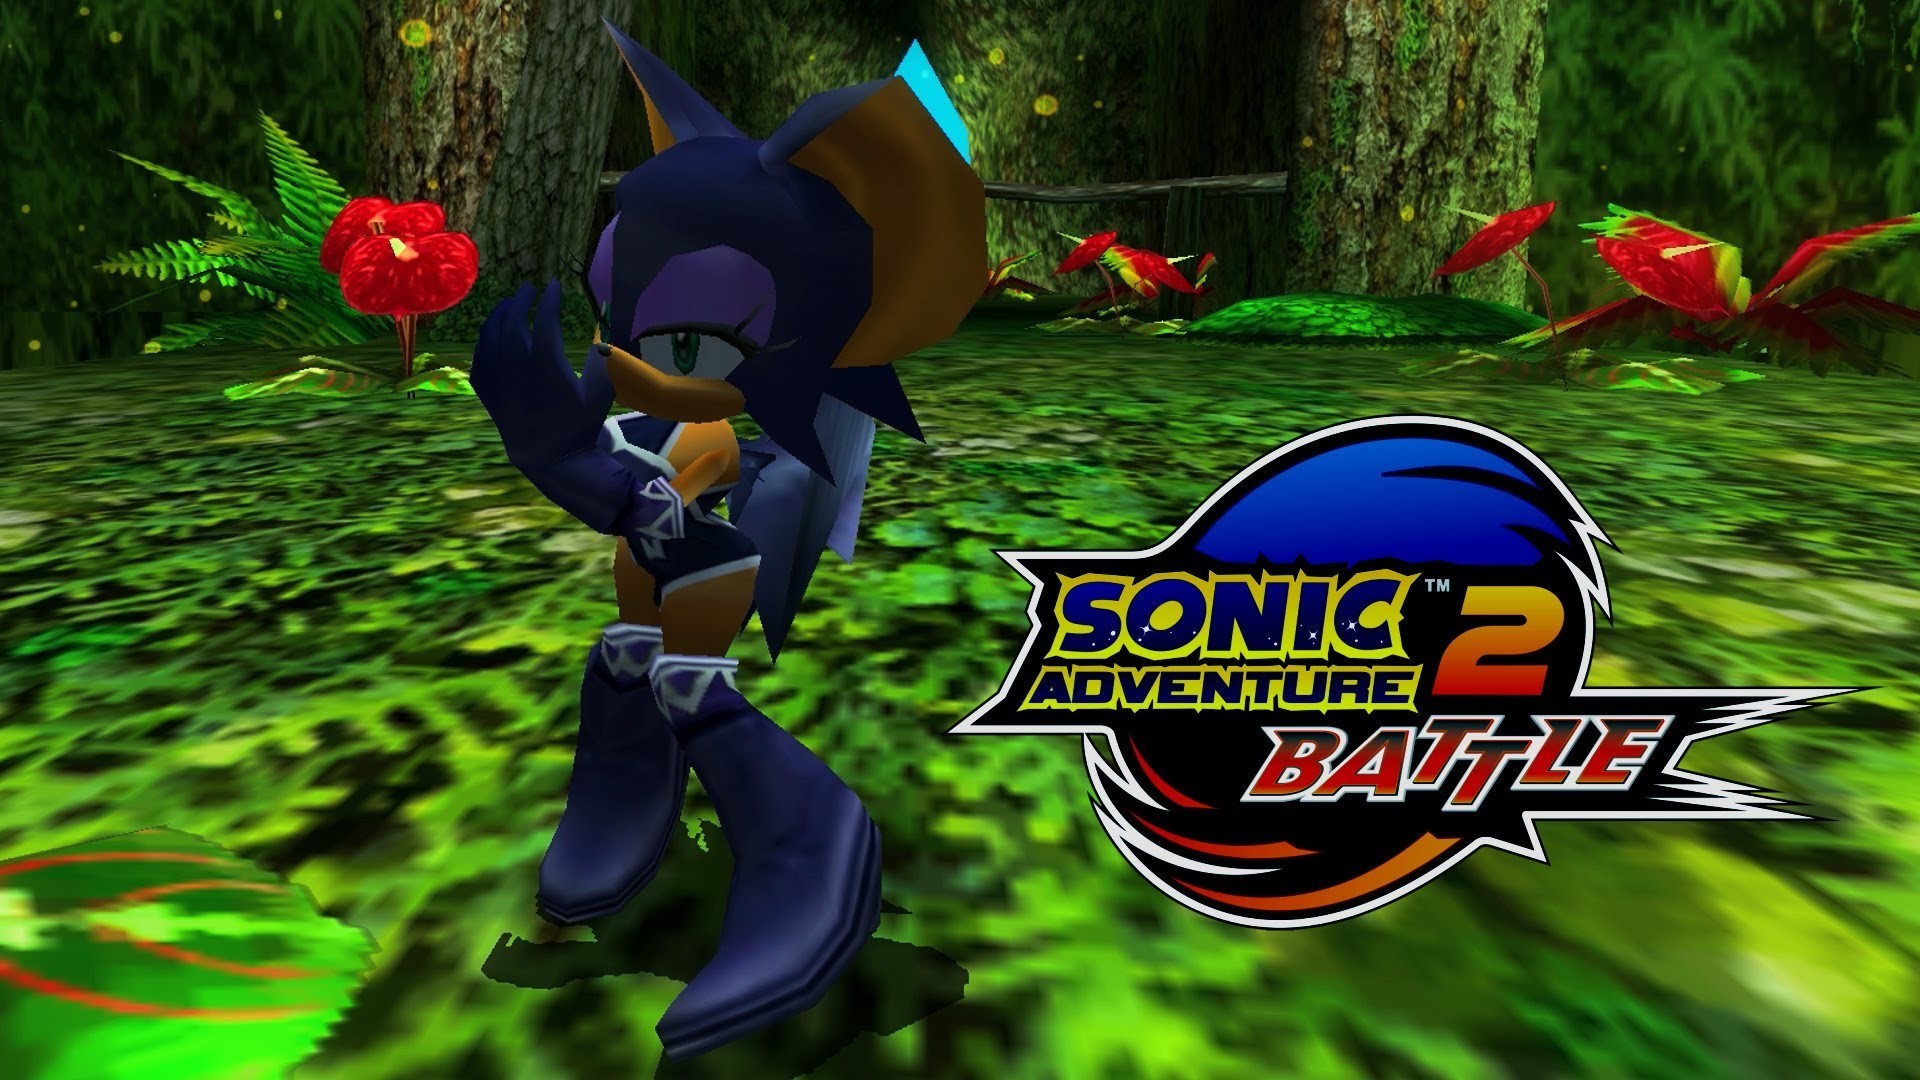 1920x1080  Sonic Adventure 2: Battle - Green Forest - Rouge (Dreamcast  costume) [REAL Full HD, Widescreen] - YouTube